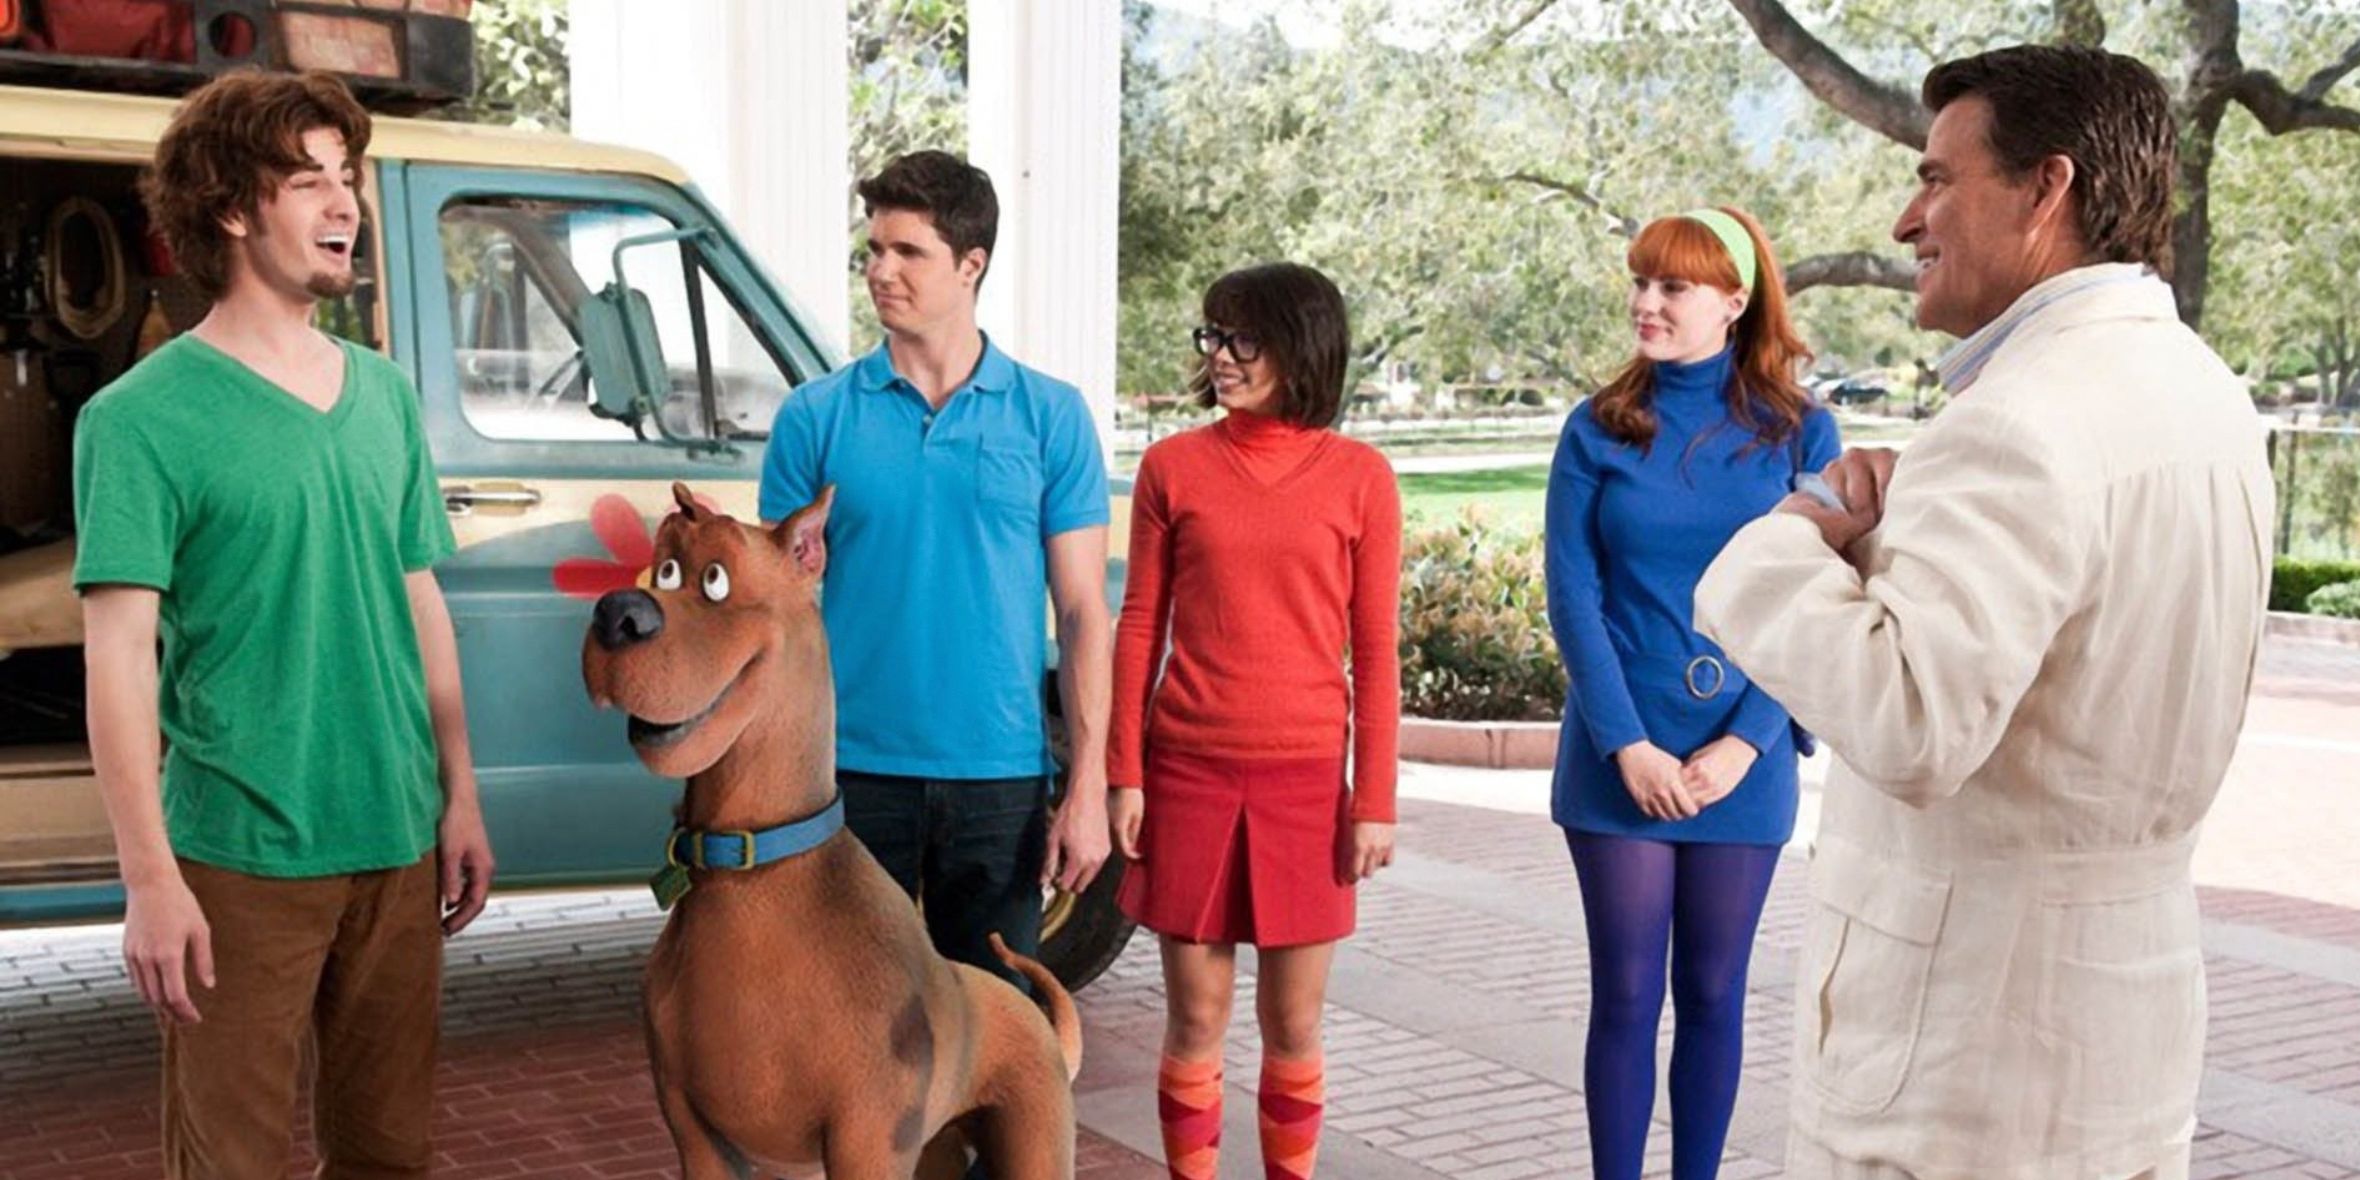 The Scooby gang arrives to work for Daphnes uncle in Scooby Doo and the Curse of the Lake Monster